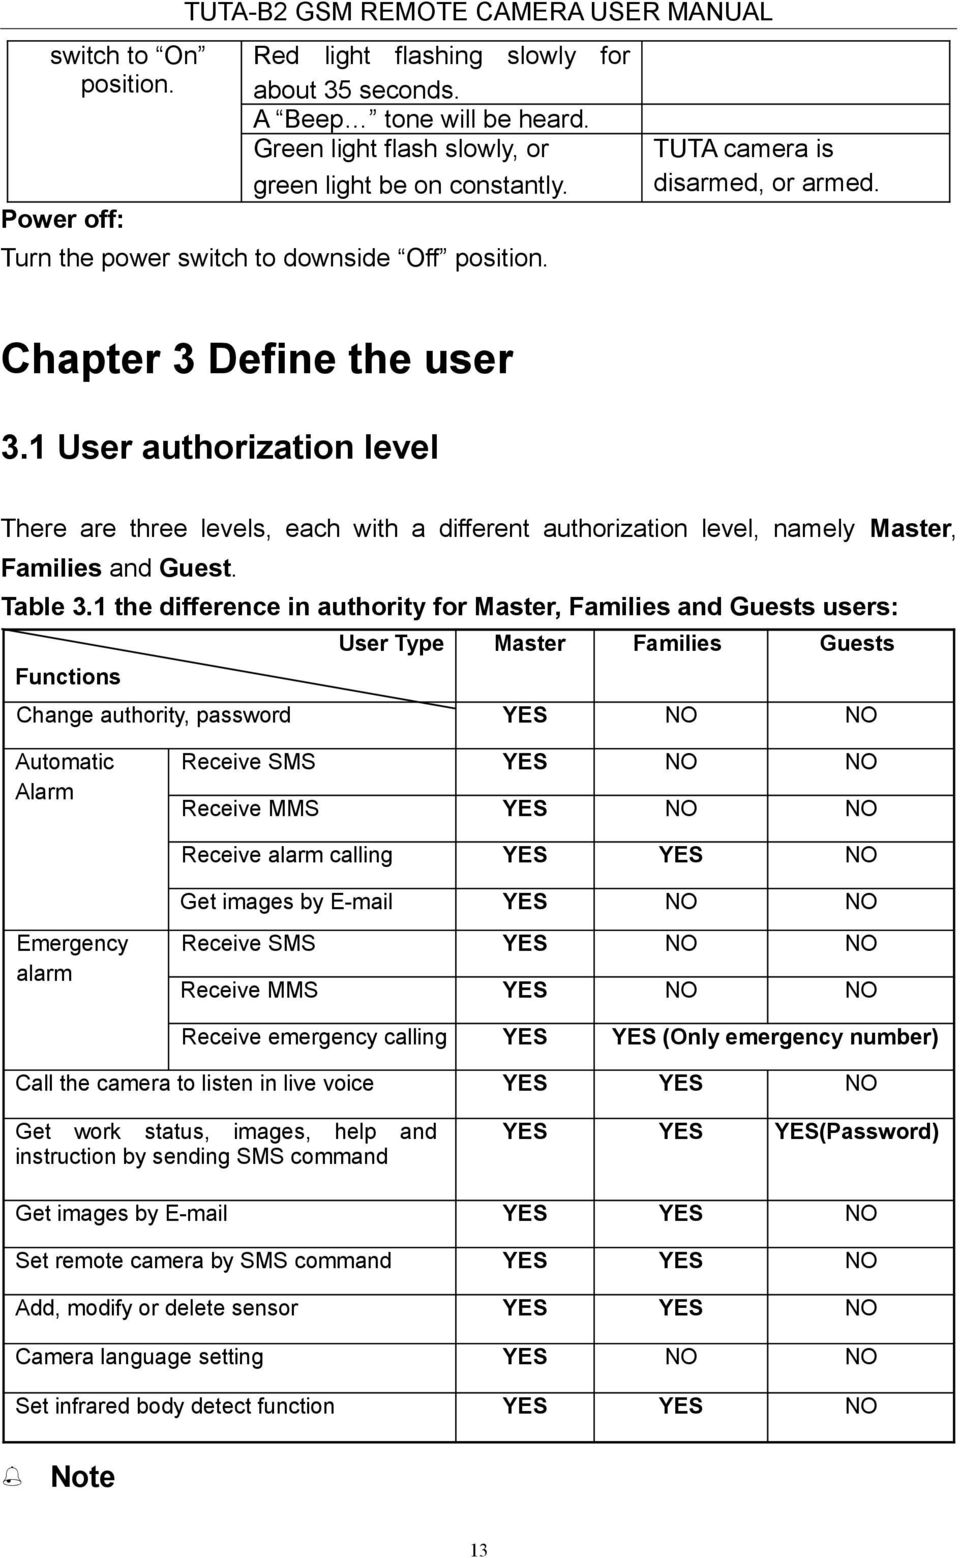 1 User authorization level There are three levels, each with a different authorization level, namely Master, Families and Guest. Table 3.